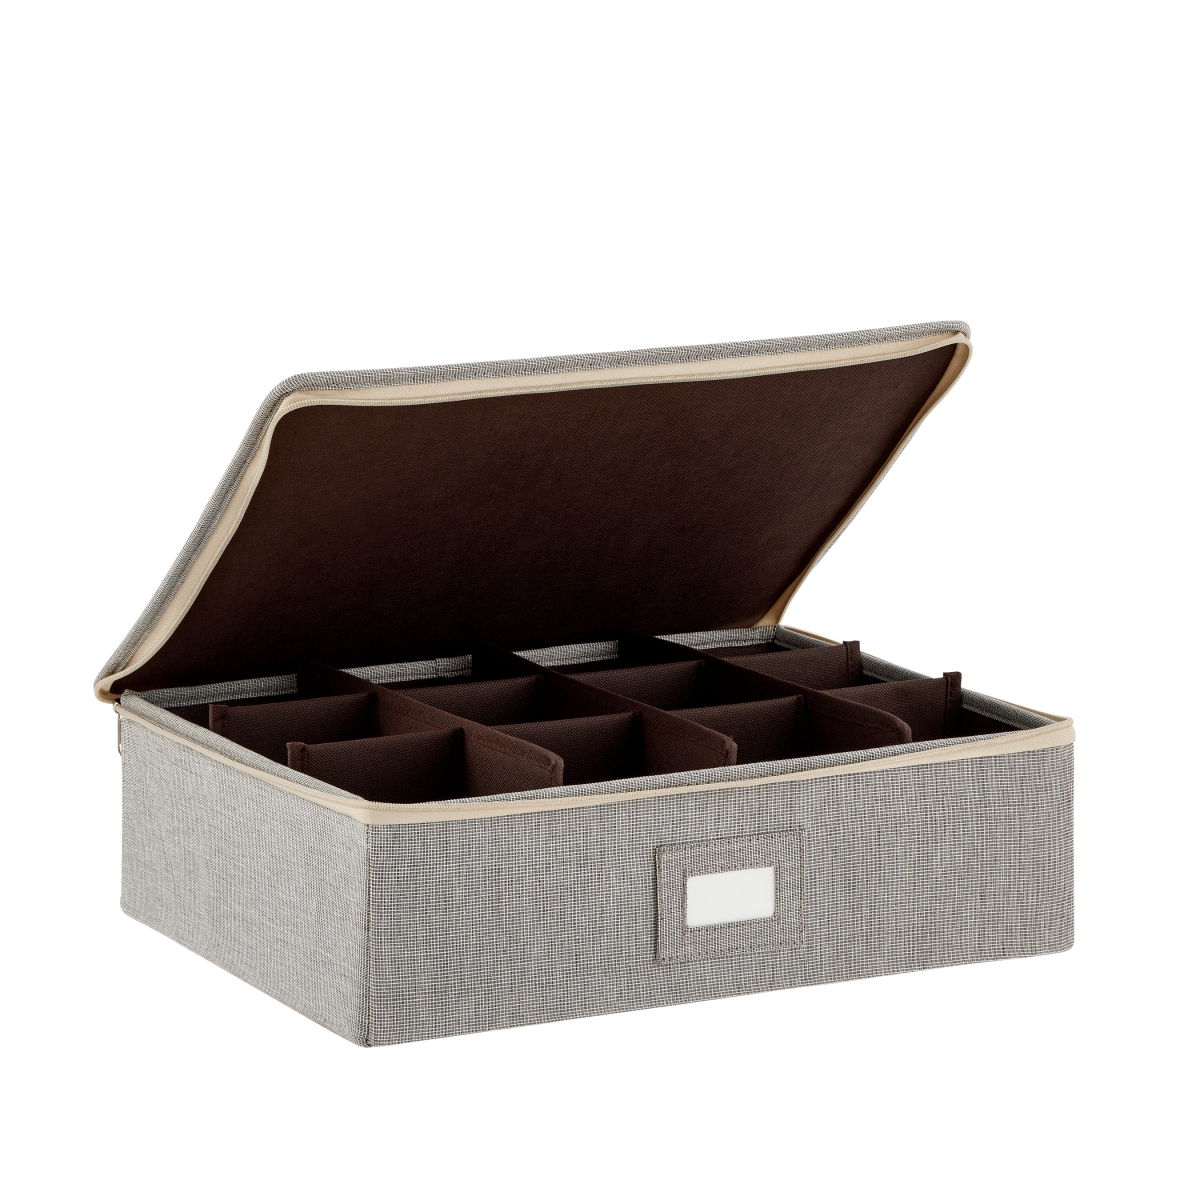 https://www.containerstore.com/catalogimages/479477/10062017G_Cup_Mug_Storage_Case_Brown.jpg